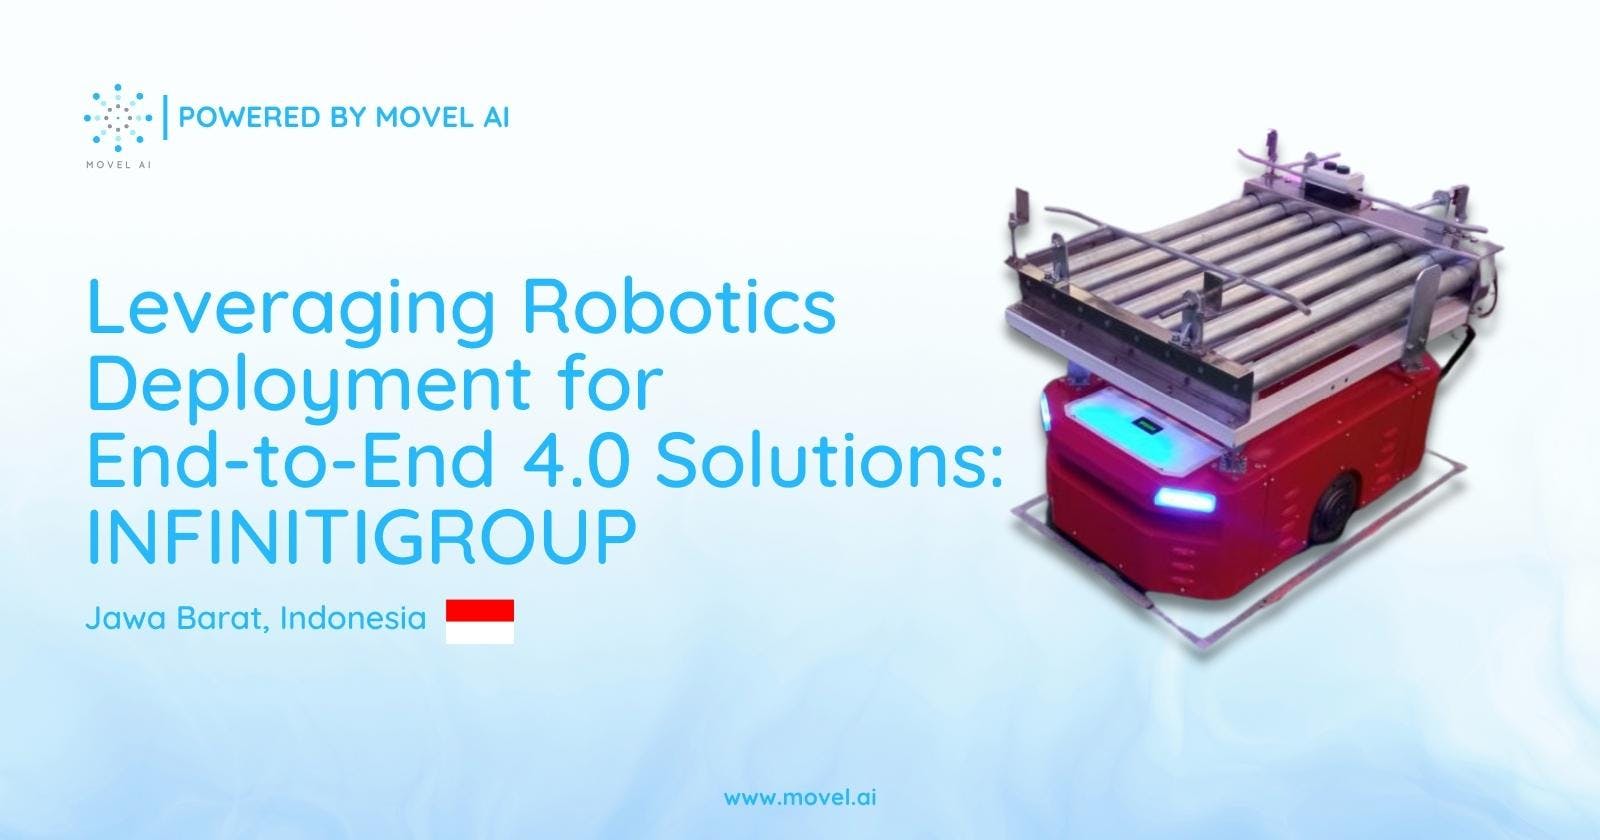 Leveraging Robotics Deployment for End-to-End 4.0 Solutions: INFINITIGROUP